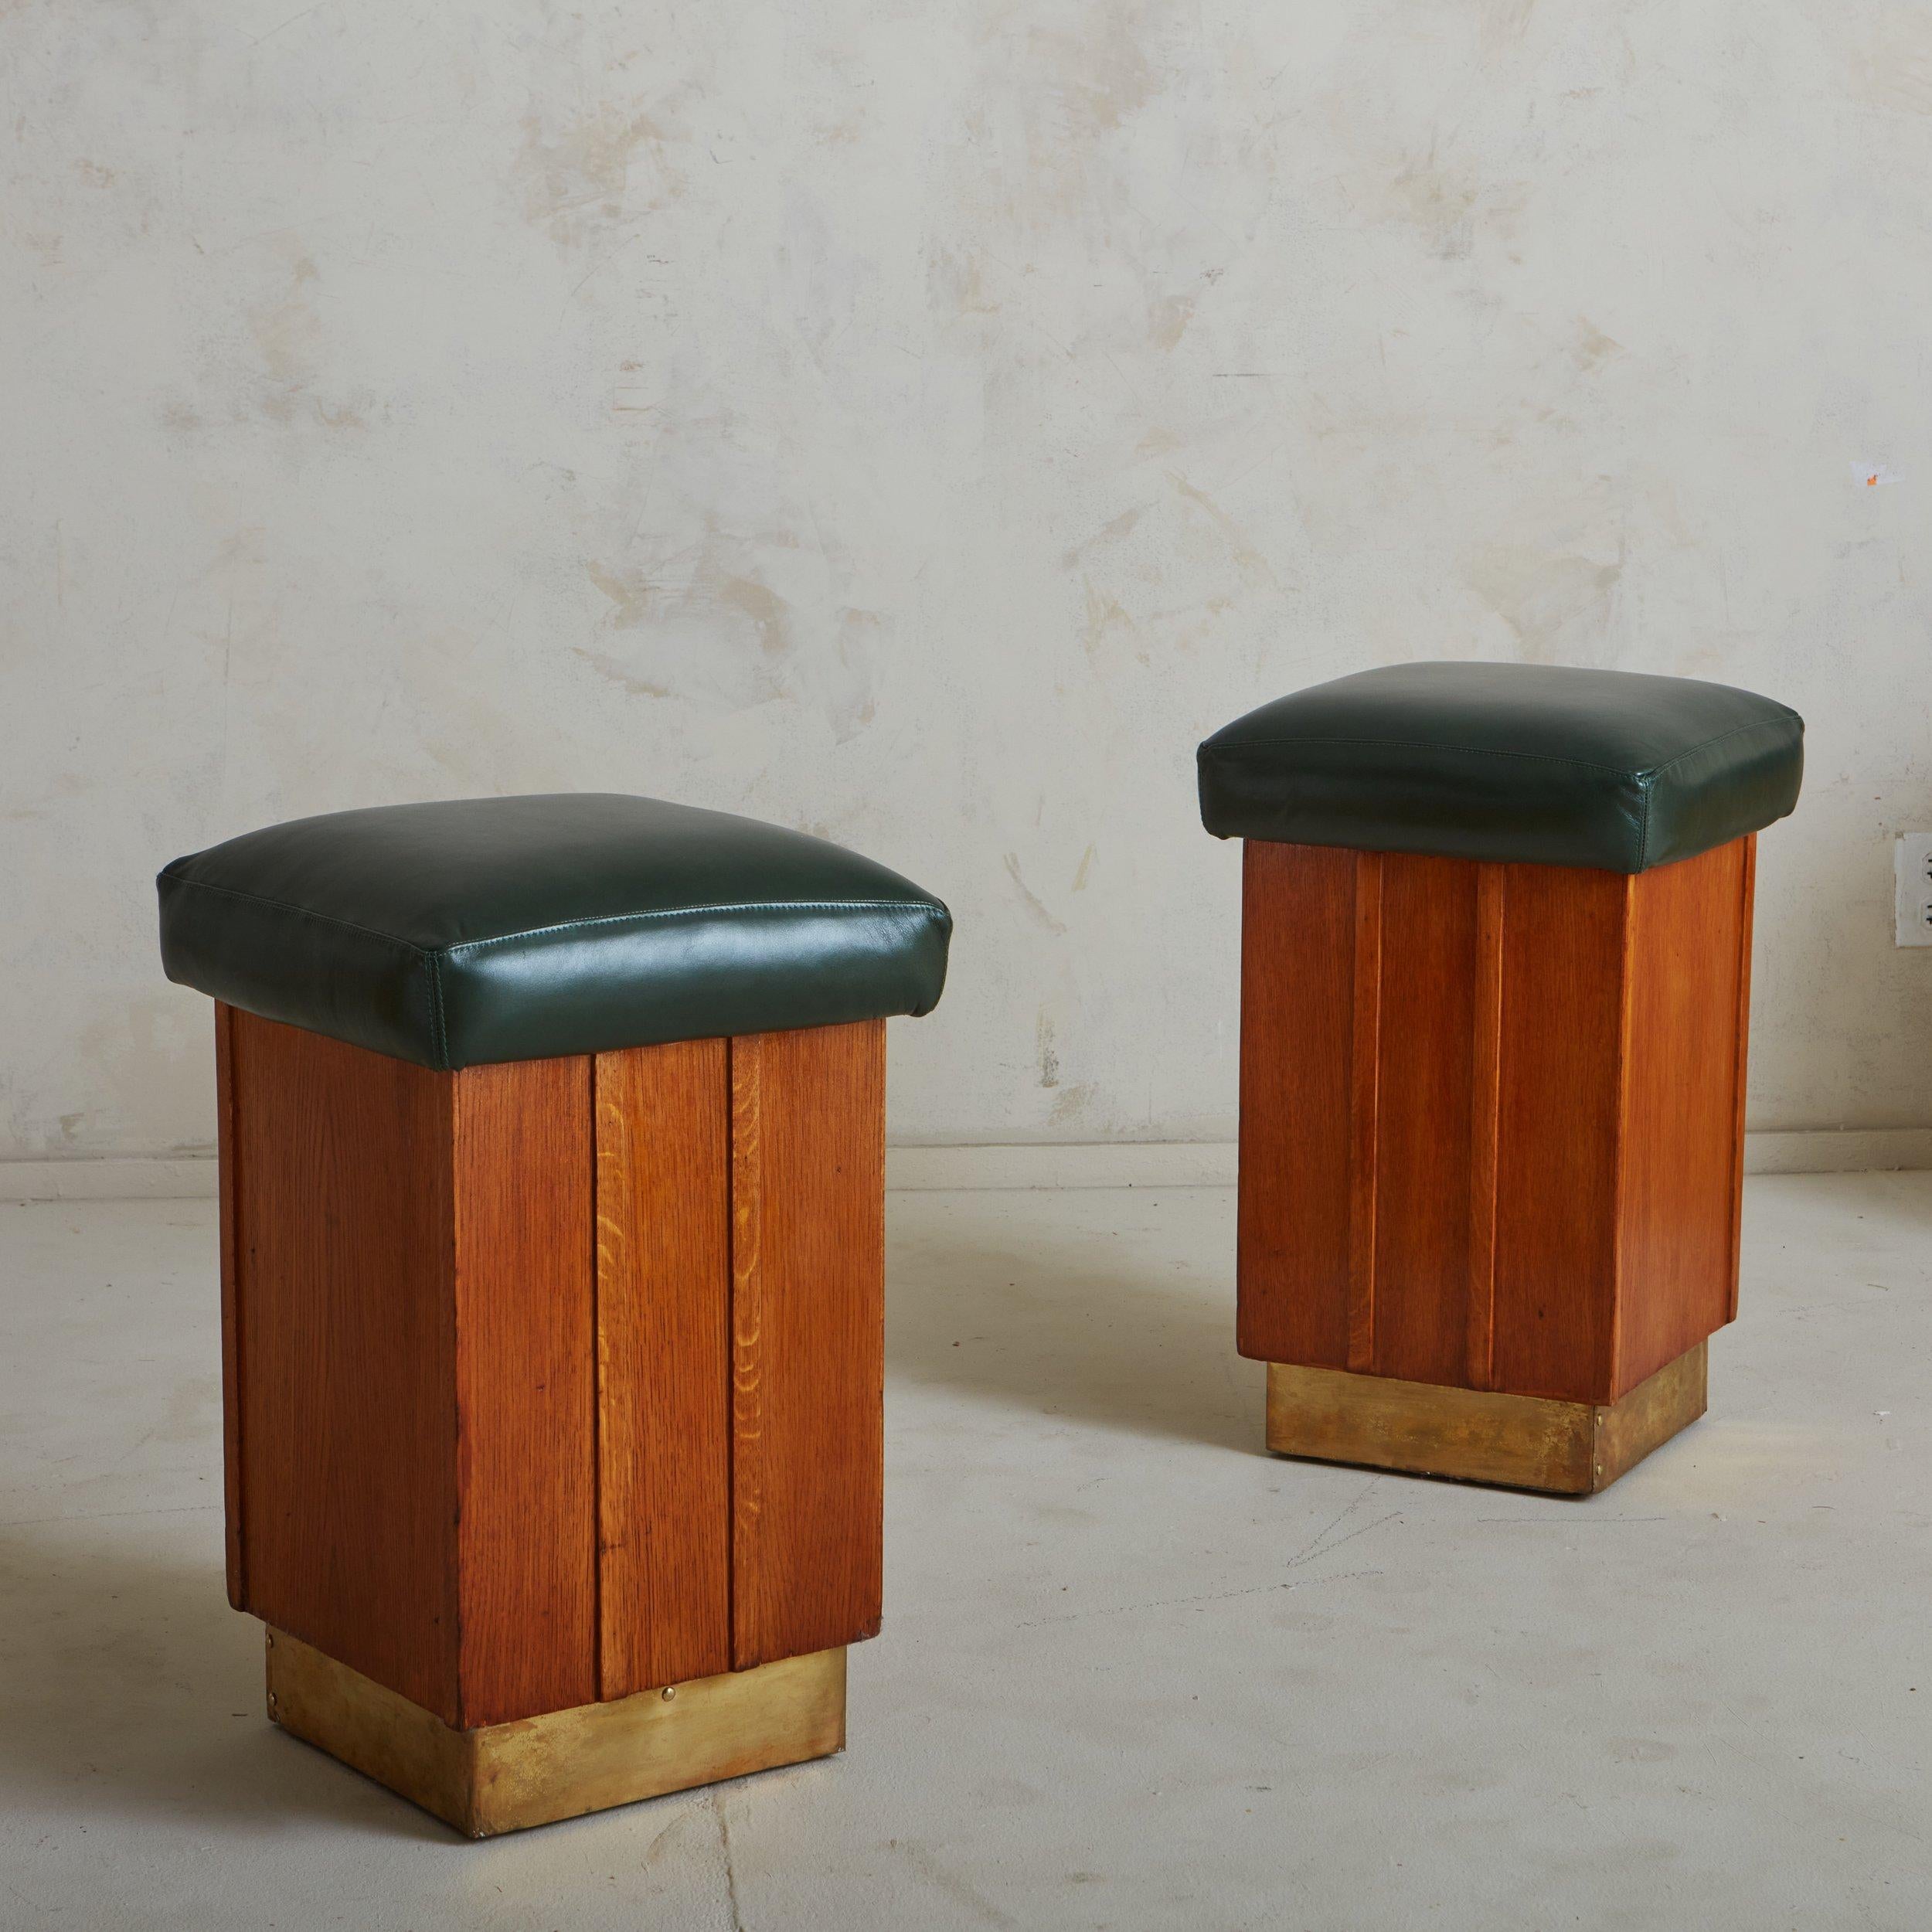 Wood + Green Leather Stool with Brass Base, Italy 1950s - 1 Available In Good Condition For Sale In Chicago, IL